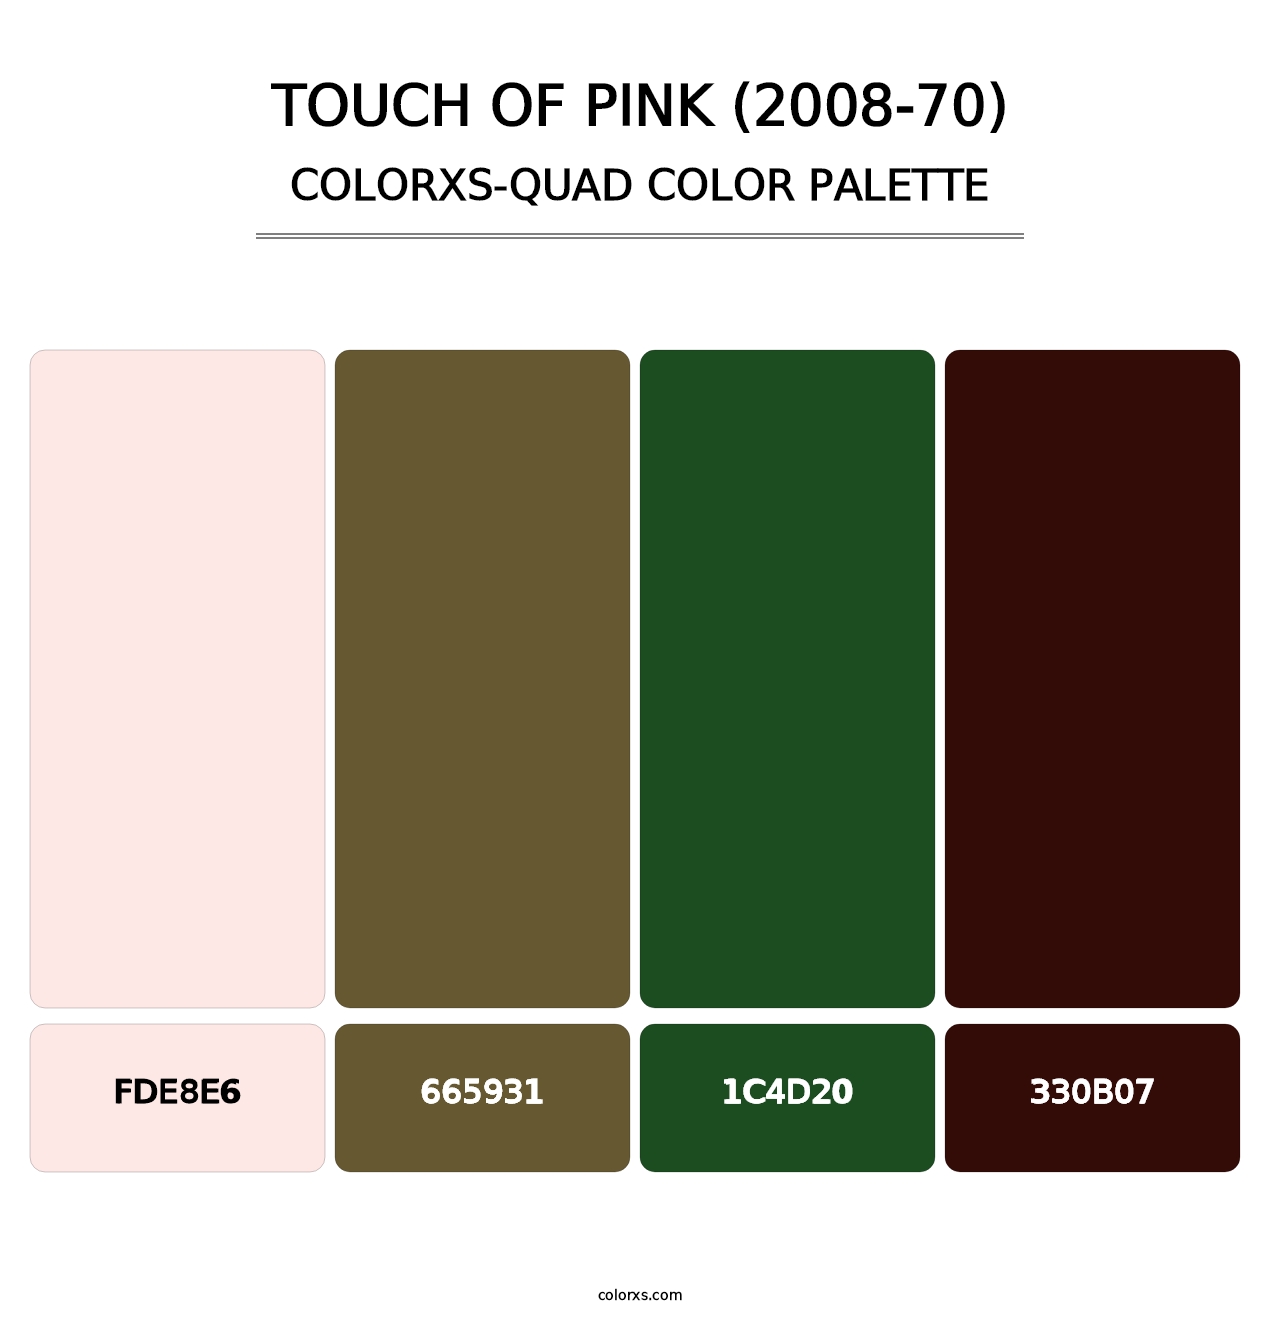 Touch of Pink (2008-70) - Colorxs Quad Palette